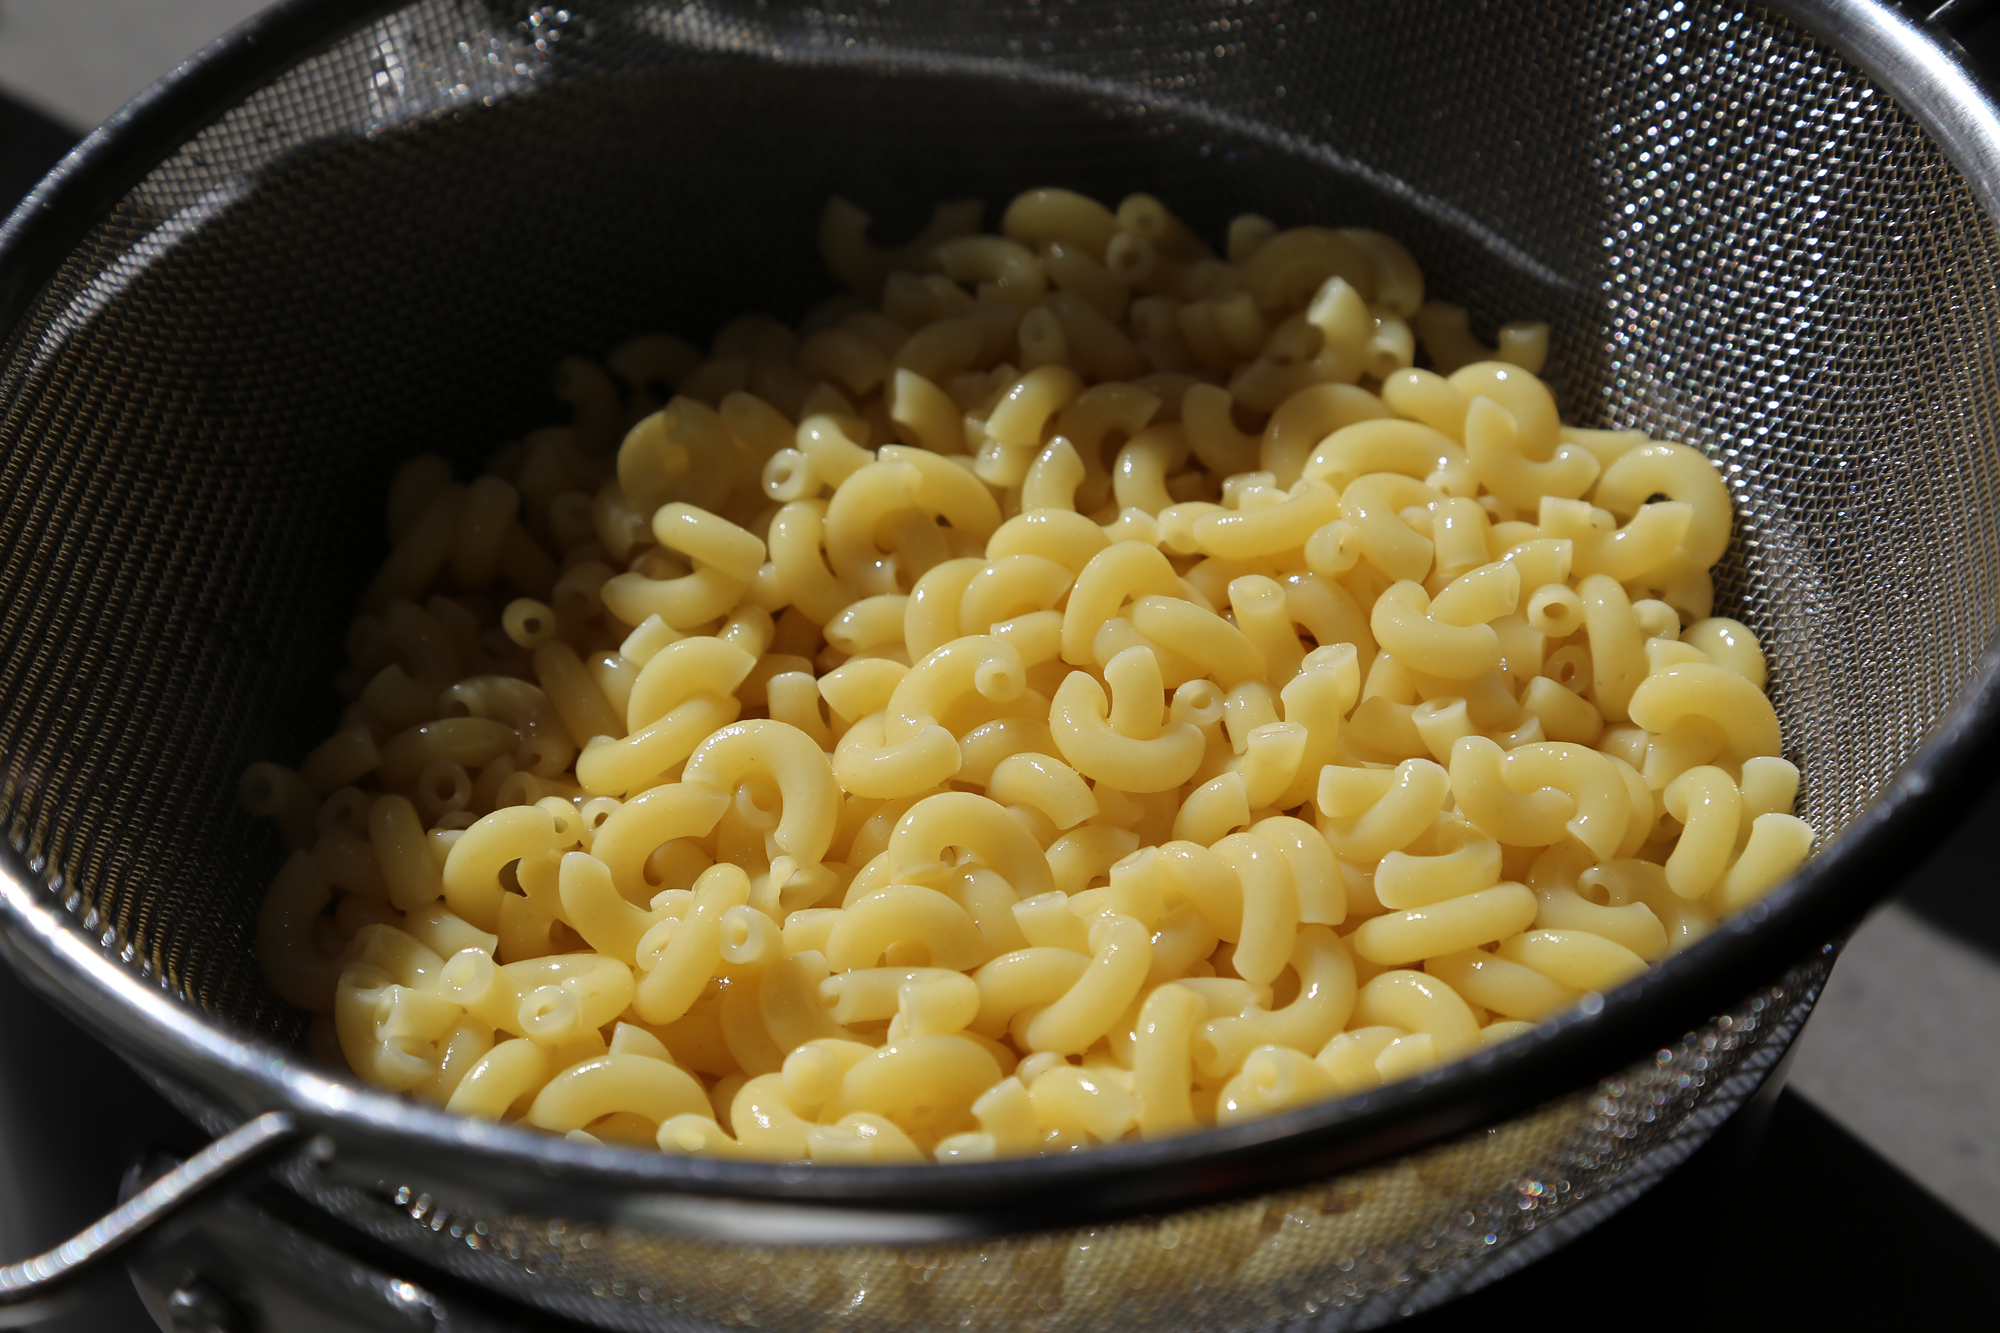 Set macaroni aside until ready to add to sauce.